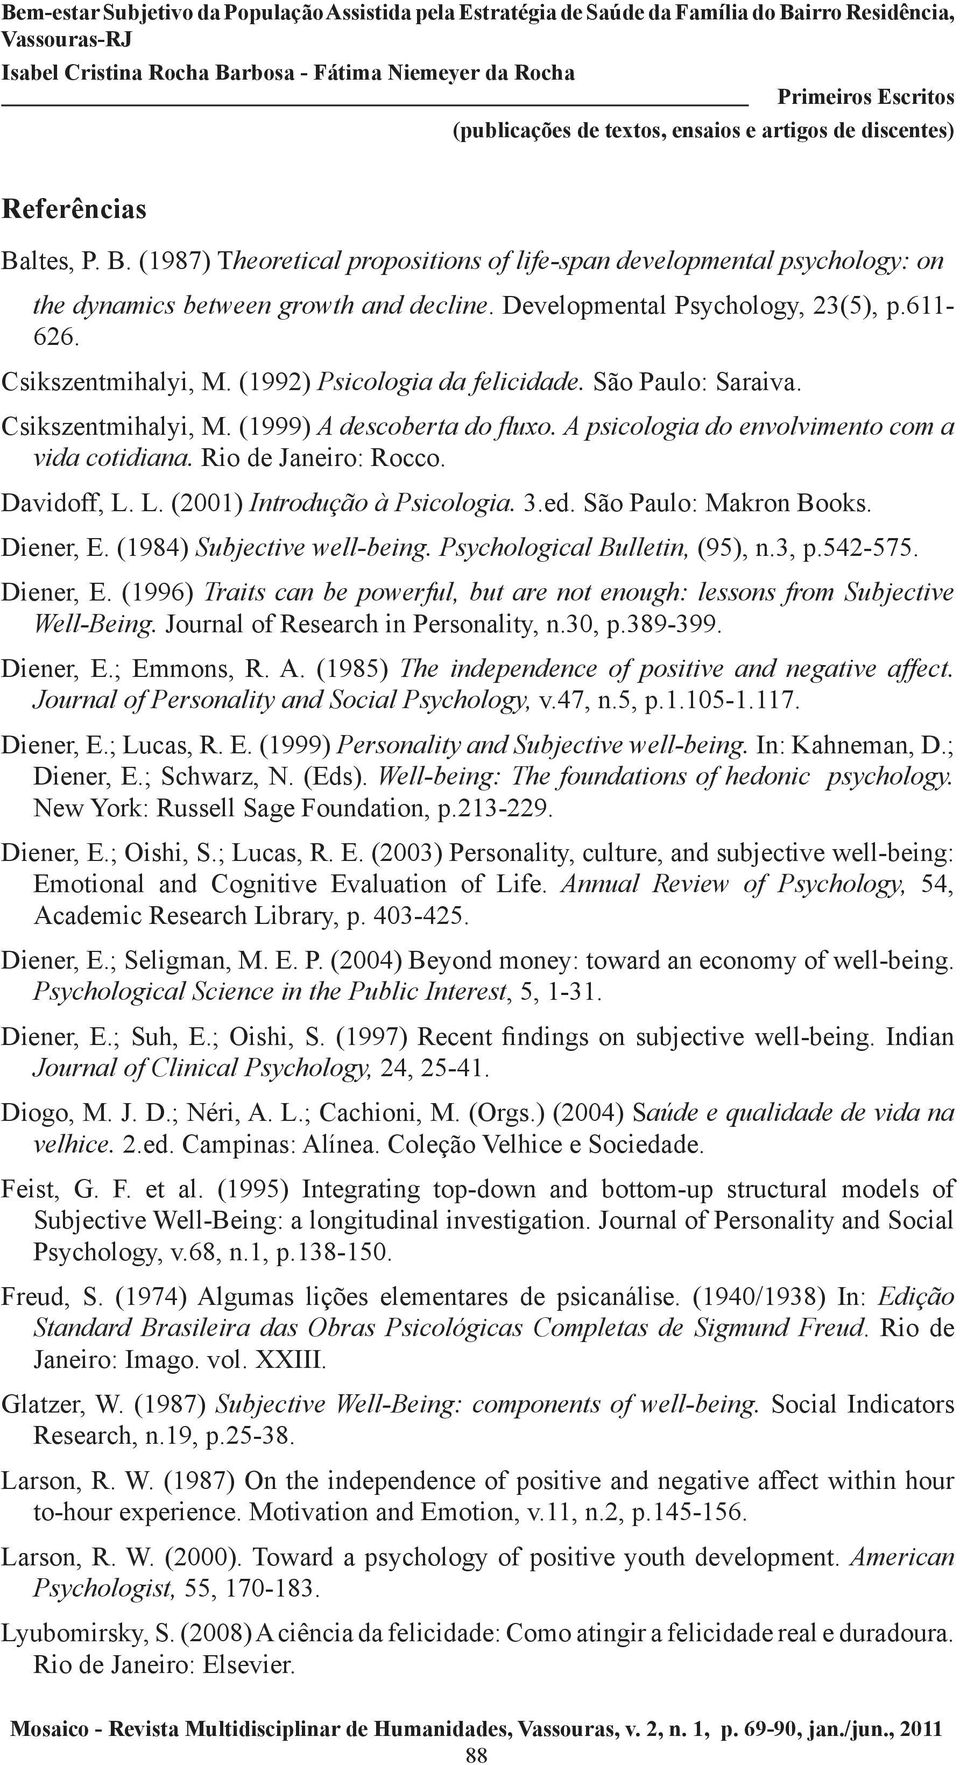 Davidoff, L. L. (2001) Introdução à Psicologia. 3.ed. São Paulo: Makron Books. Diener, E. (1984) Subjective well-being. Psychological Bulletin, (95), n.3, p.542-575. Diener, E. (1996) Traits can be powerful, but are not enough: lessons from Subjective Well-Being.